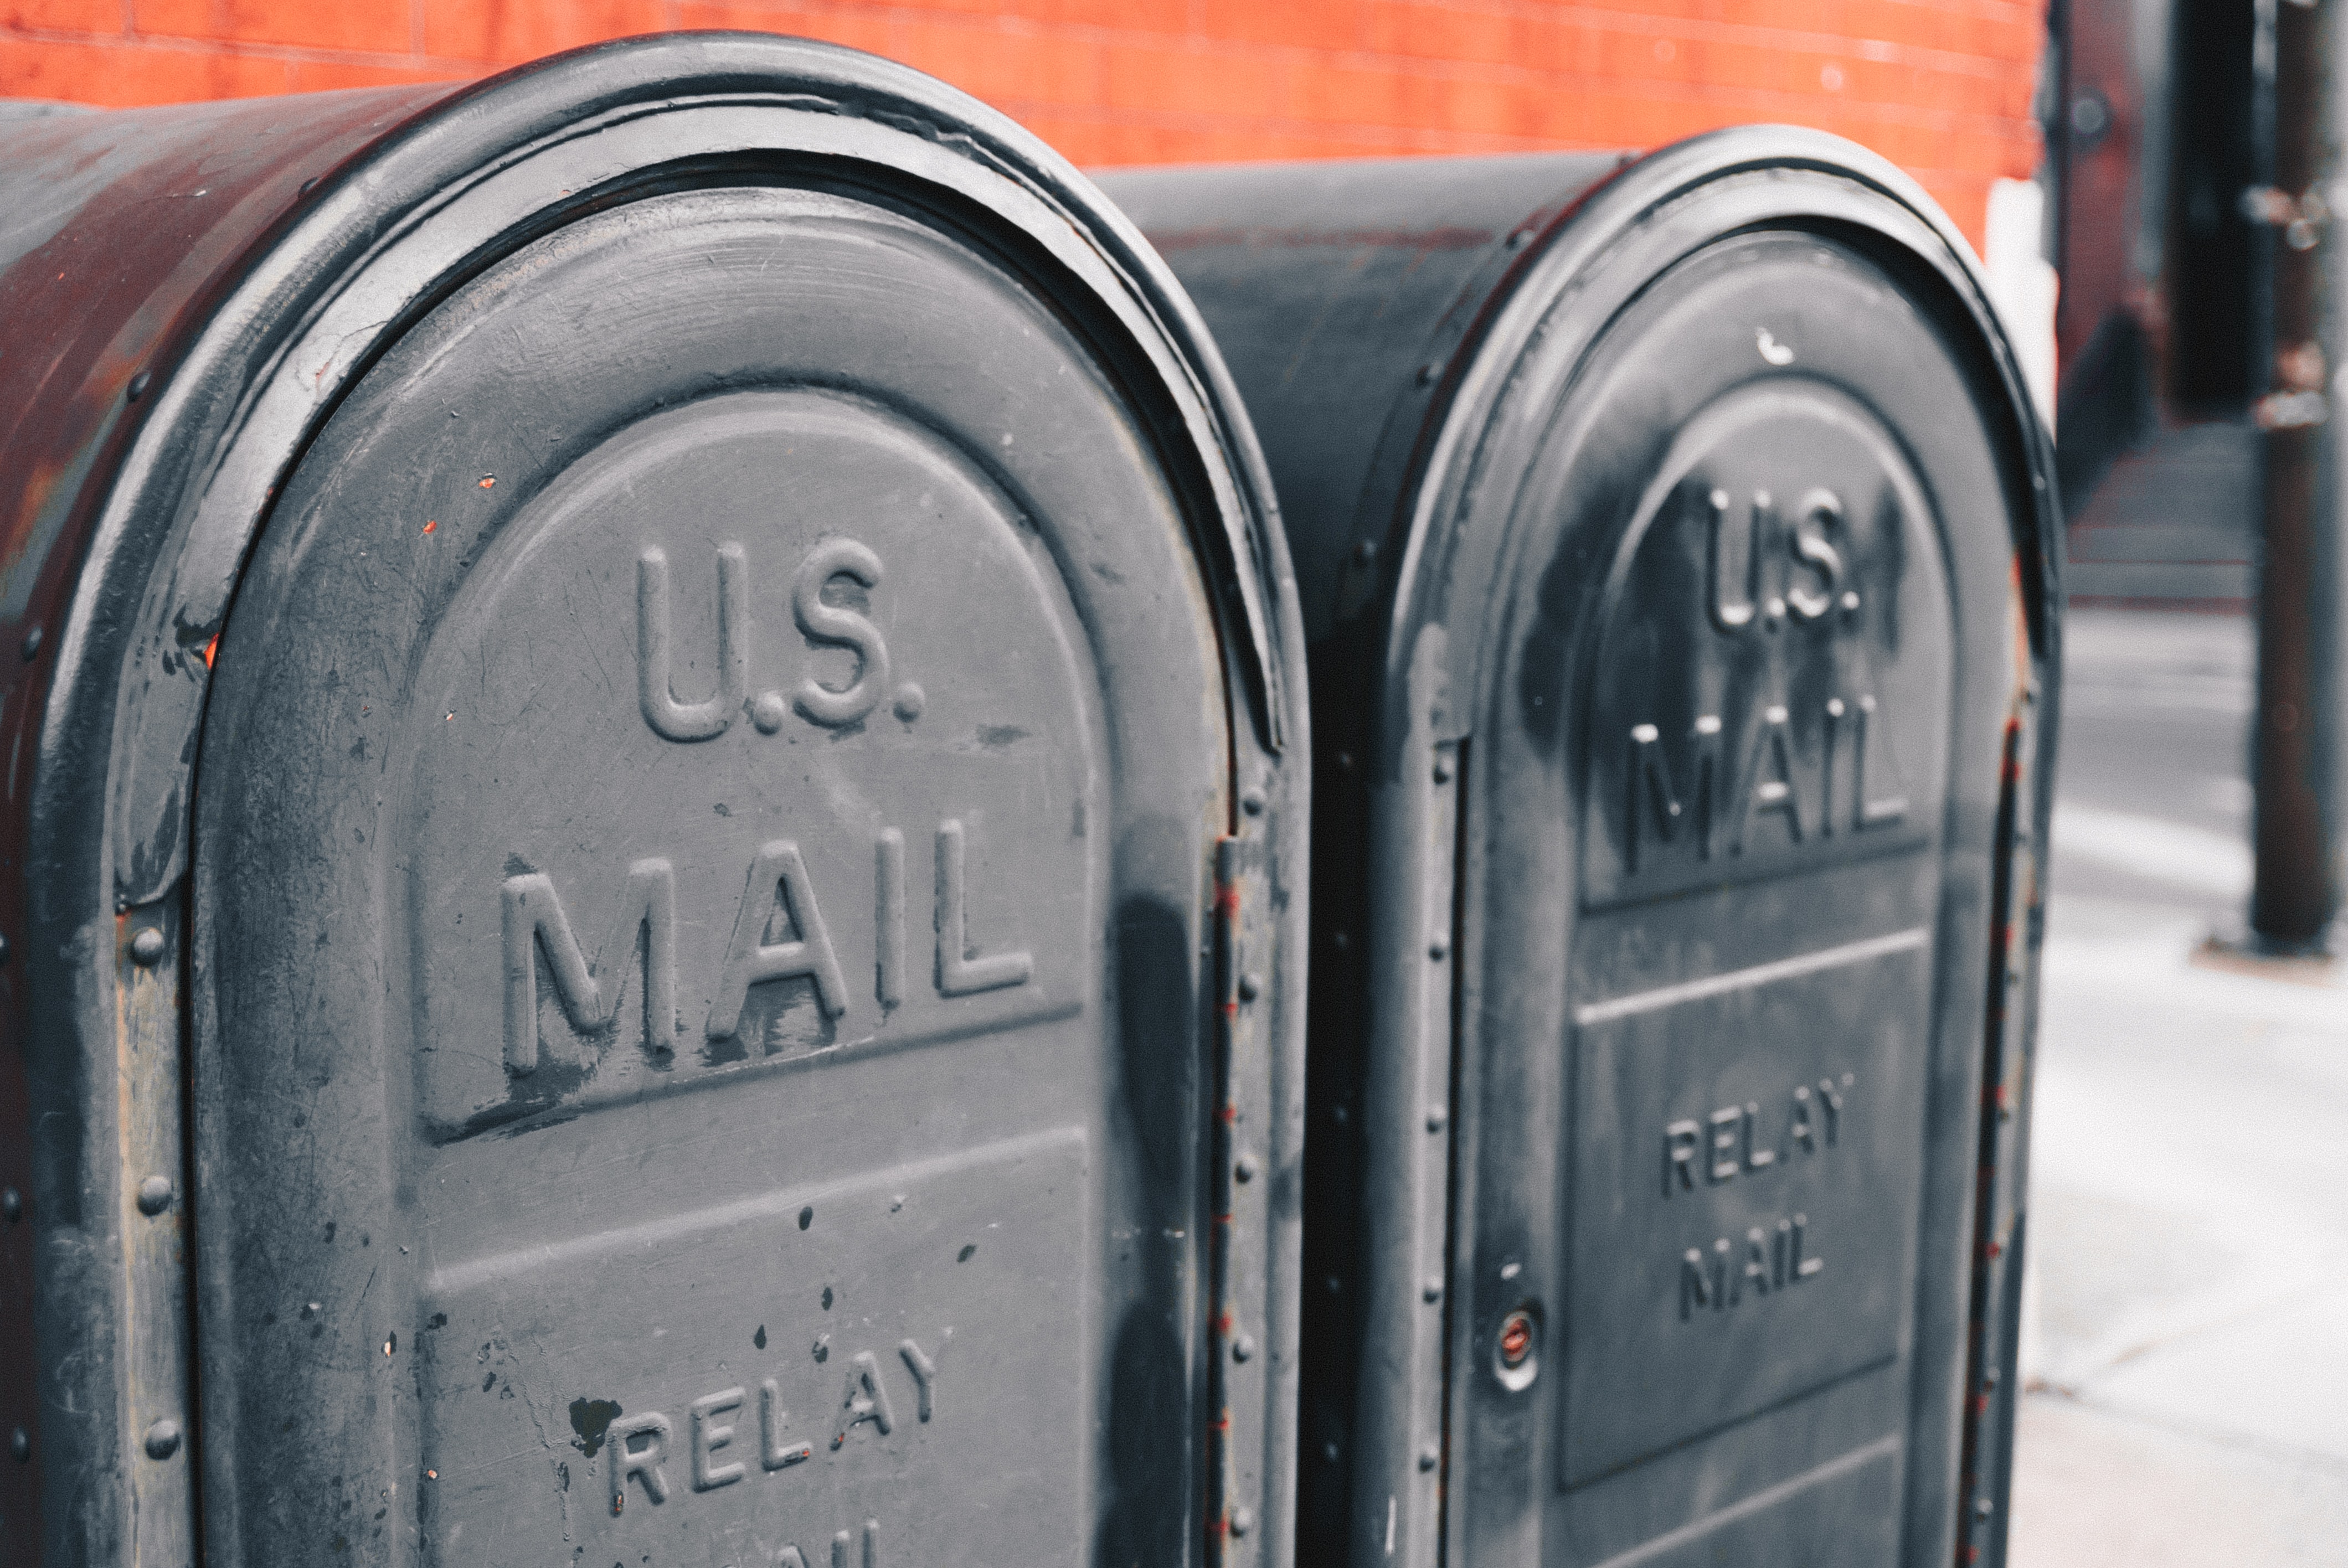 US Mail relay mail boxes on a street